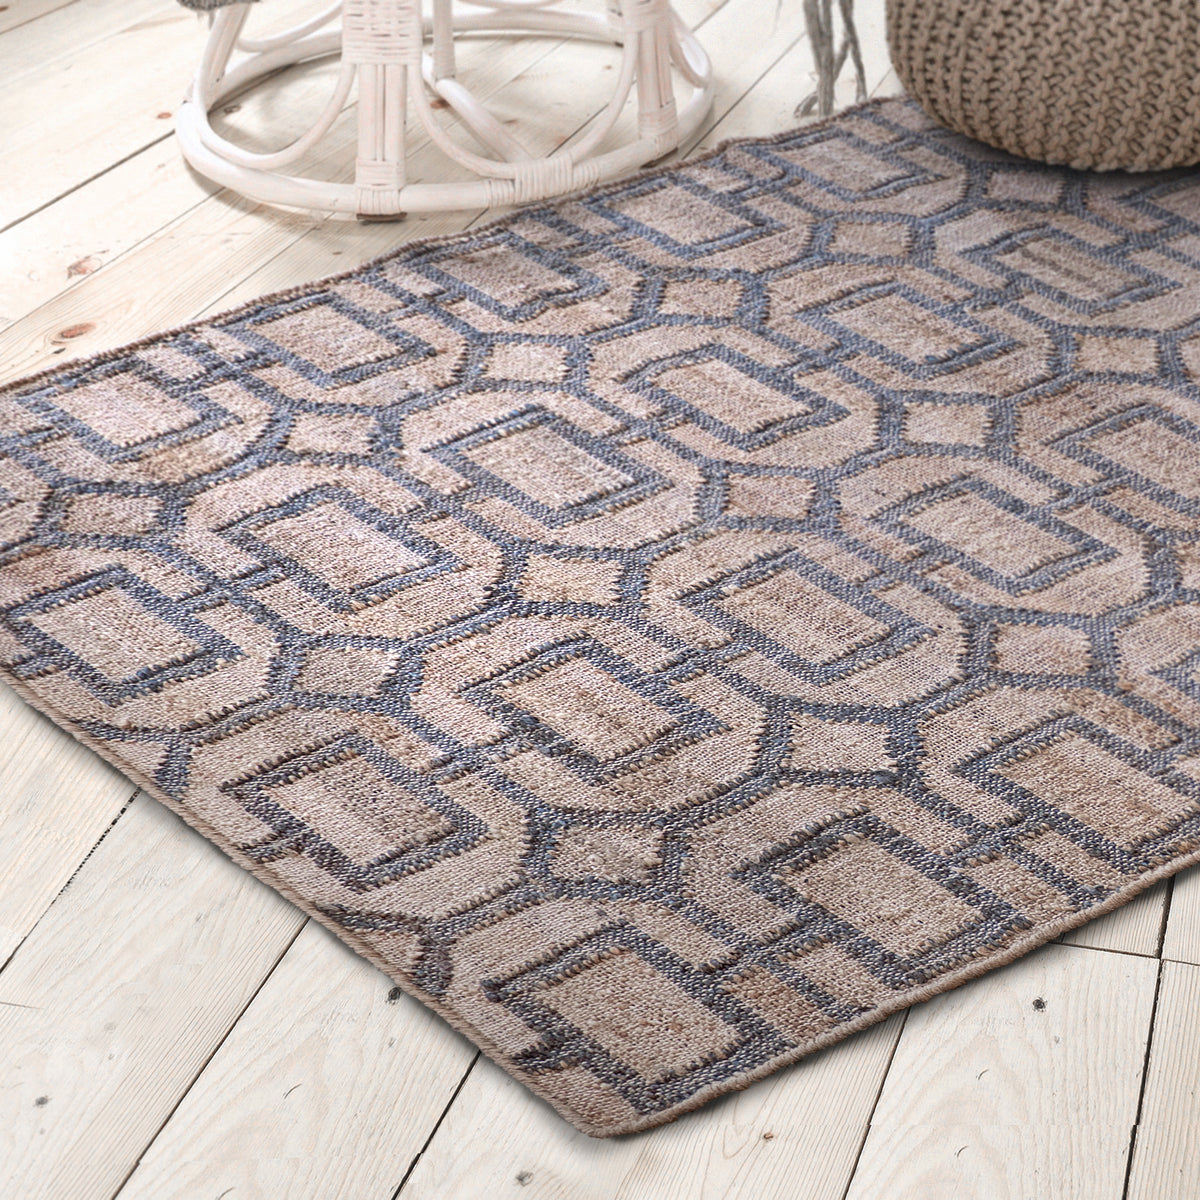 Lifestyle photo. Jute rug shown against a whitewashed wood floor.